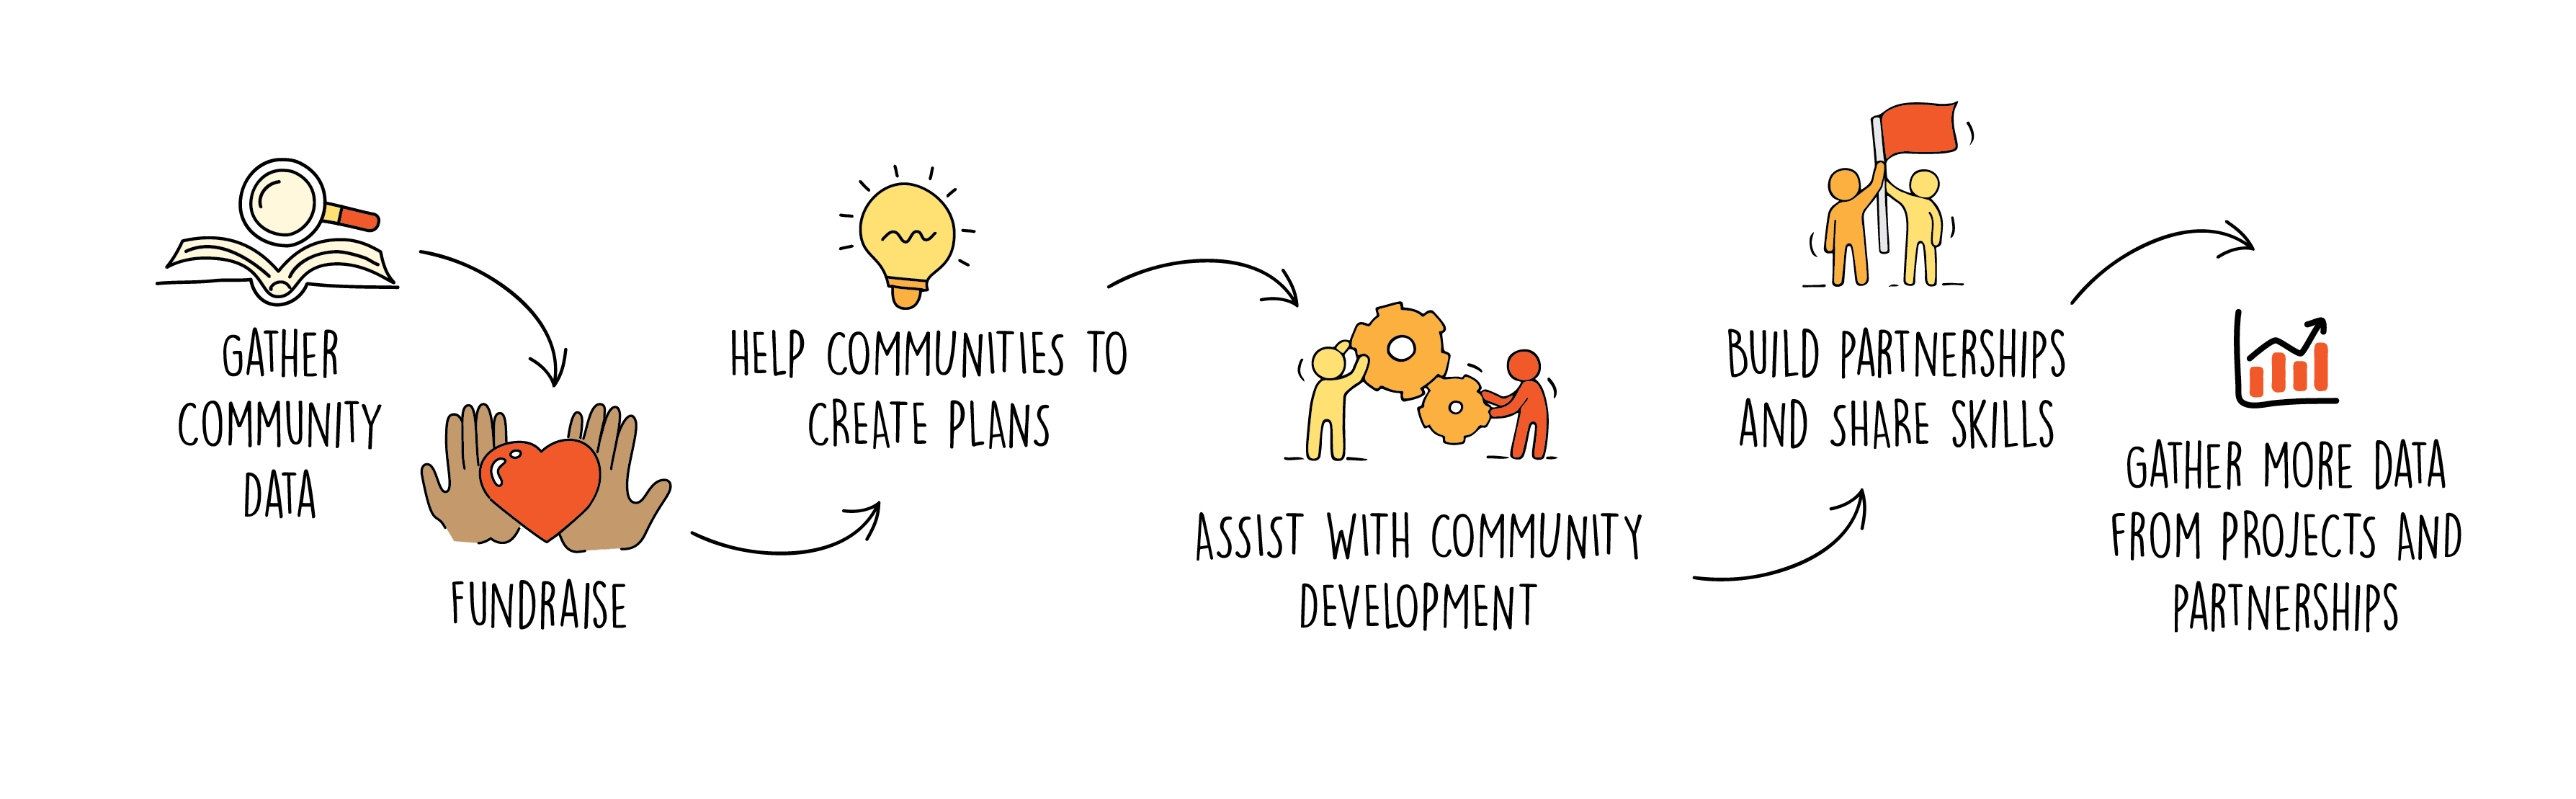 Graphic drawing of flow chart. 1) Gather community data 2) Fundraise 3)Help communities to create plans 3) Assist with community development 5) Build partnerships and share skills 6) Gather more data from projects and partnerships